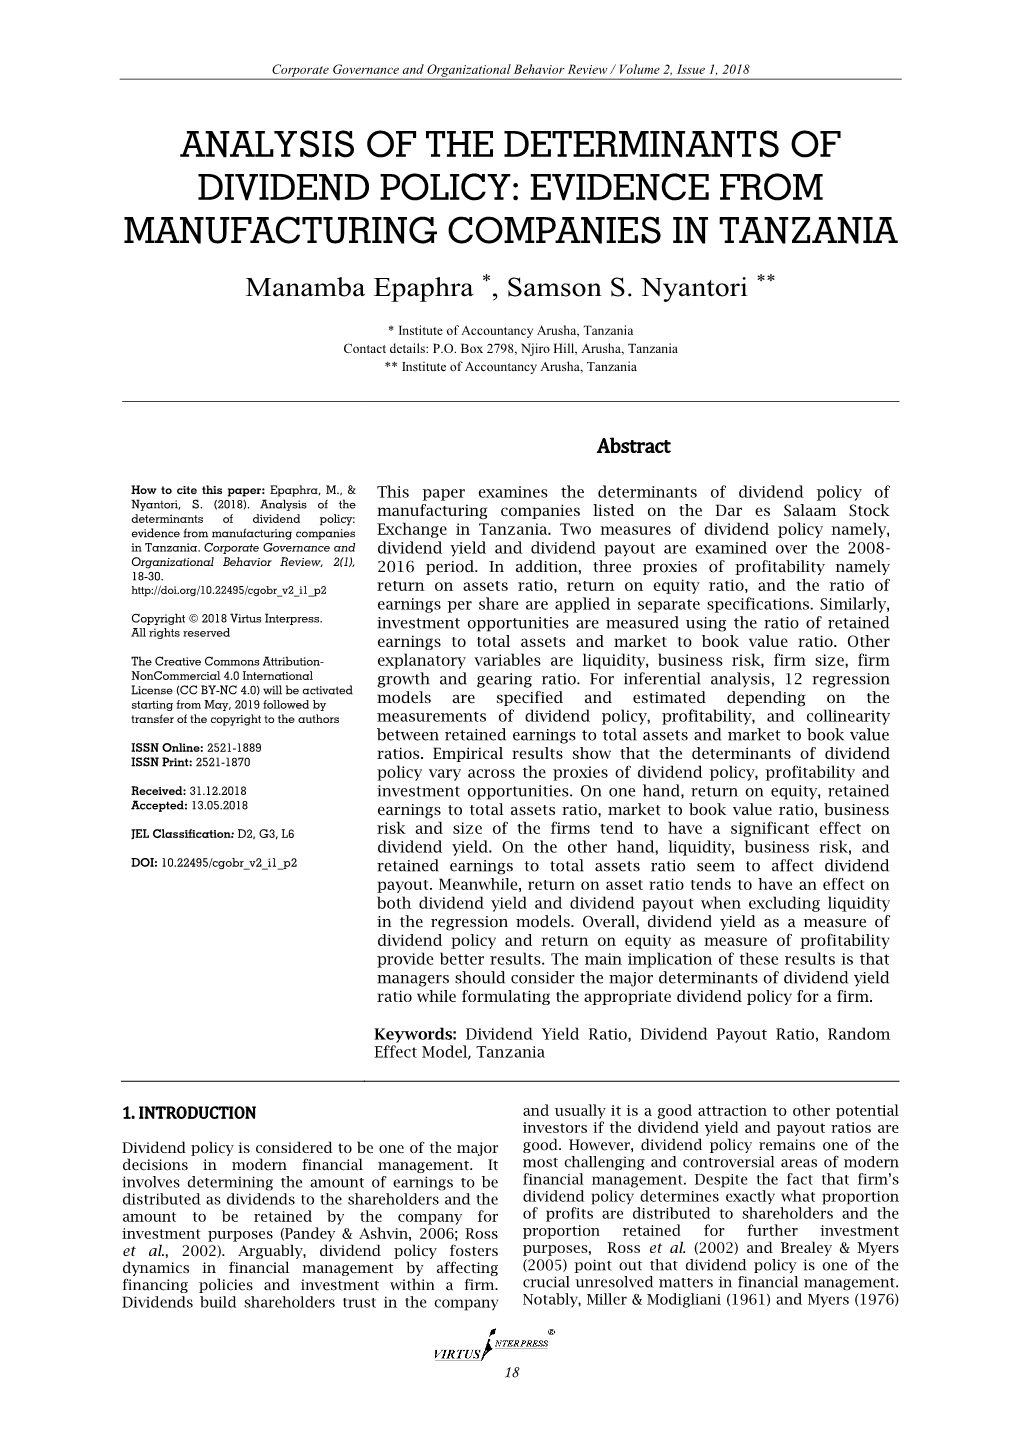 Analysis of the Determinants of Dividend Policy: Evidence from Manufacturing Companies in Tanzania